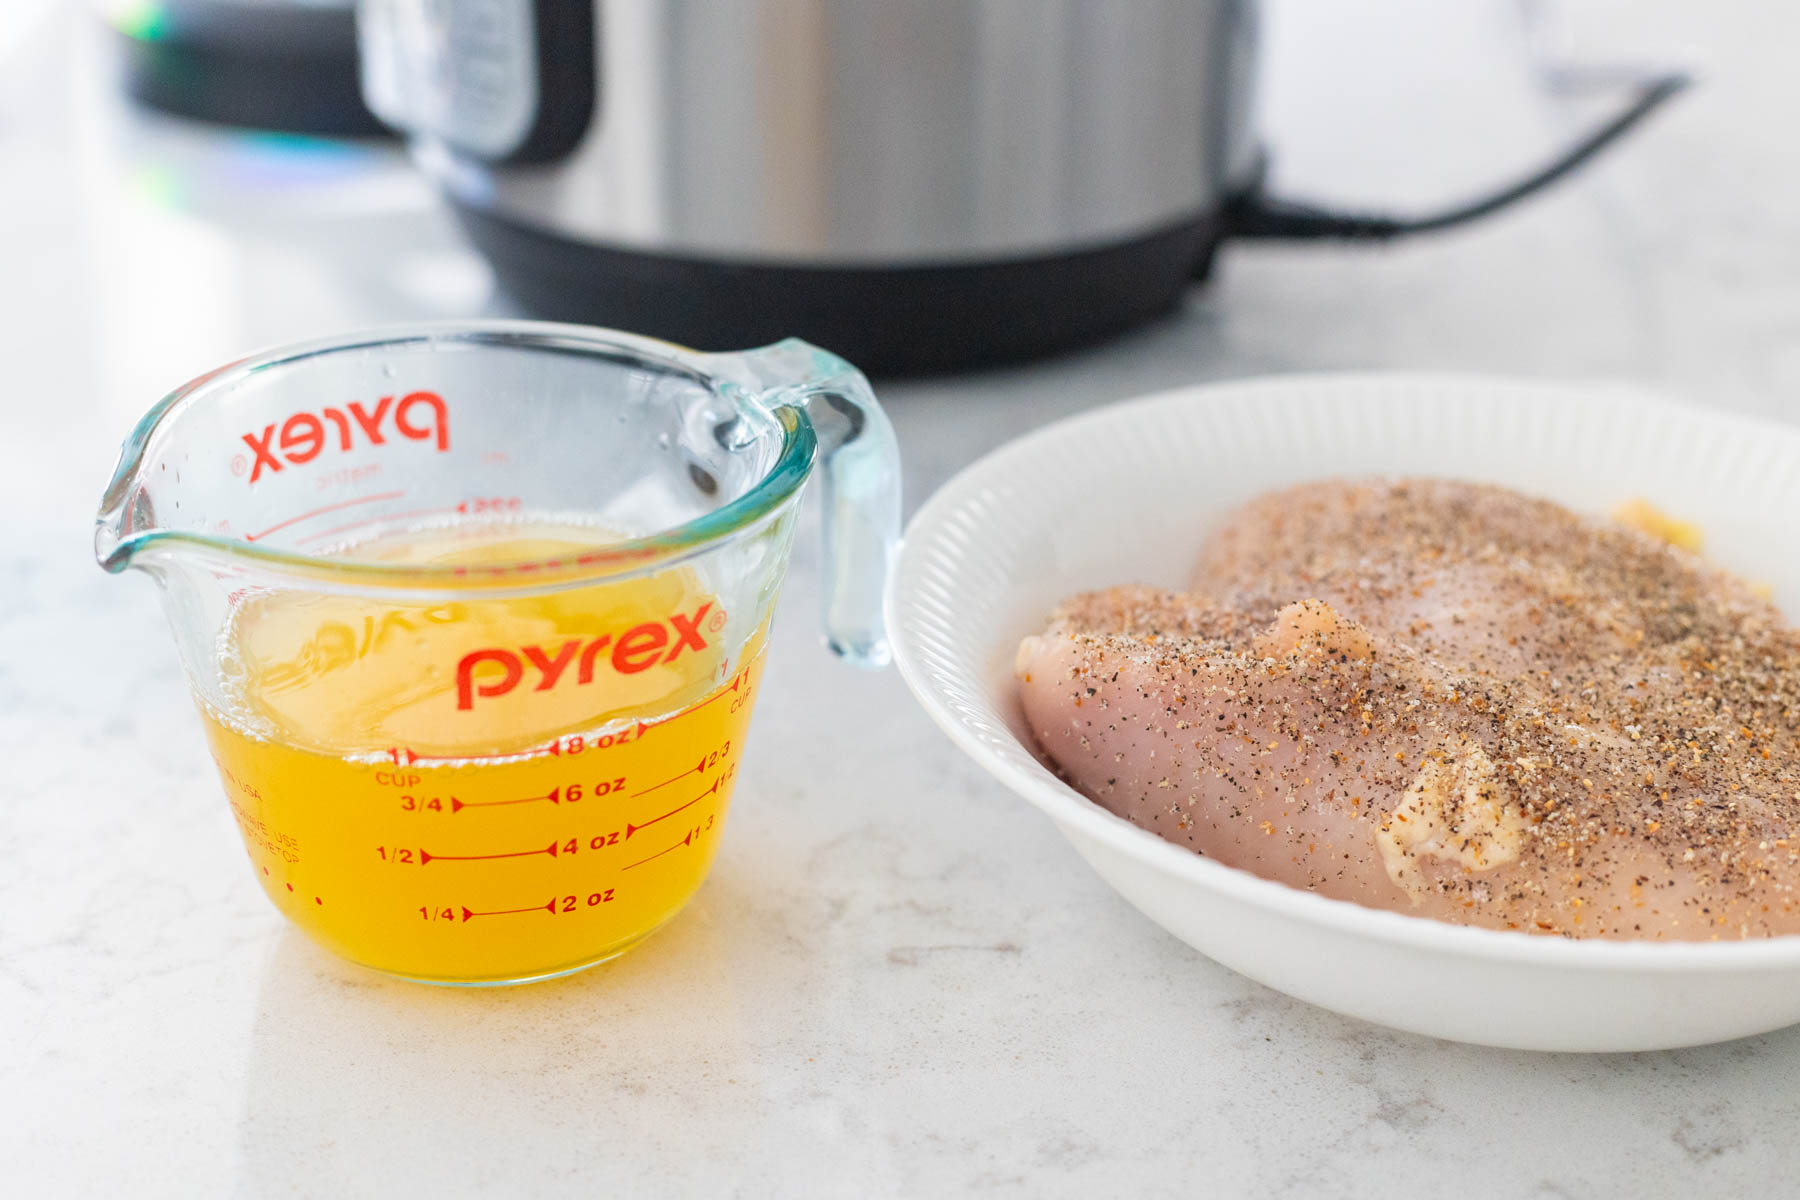 The chicken breasts have seasoning sprinkled over the top and are sitting next to a cup of chicken stock.